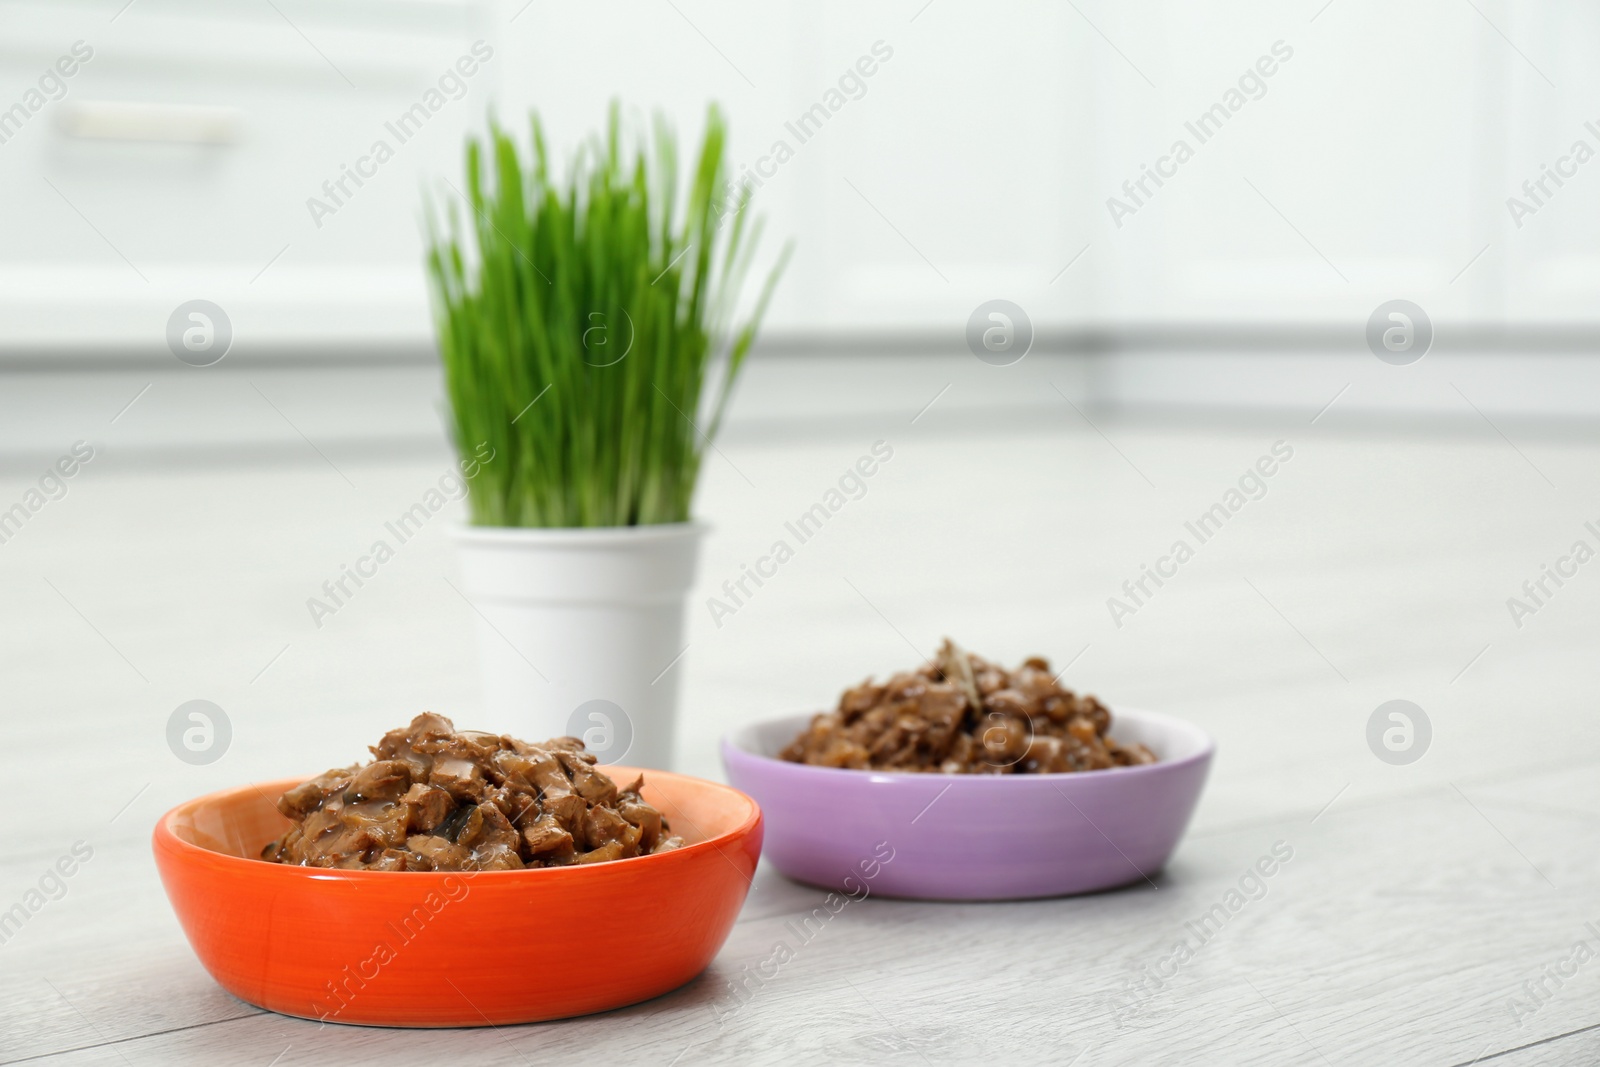 Photo of Wet pet food and green grass on floor indoors, space for text